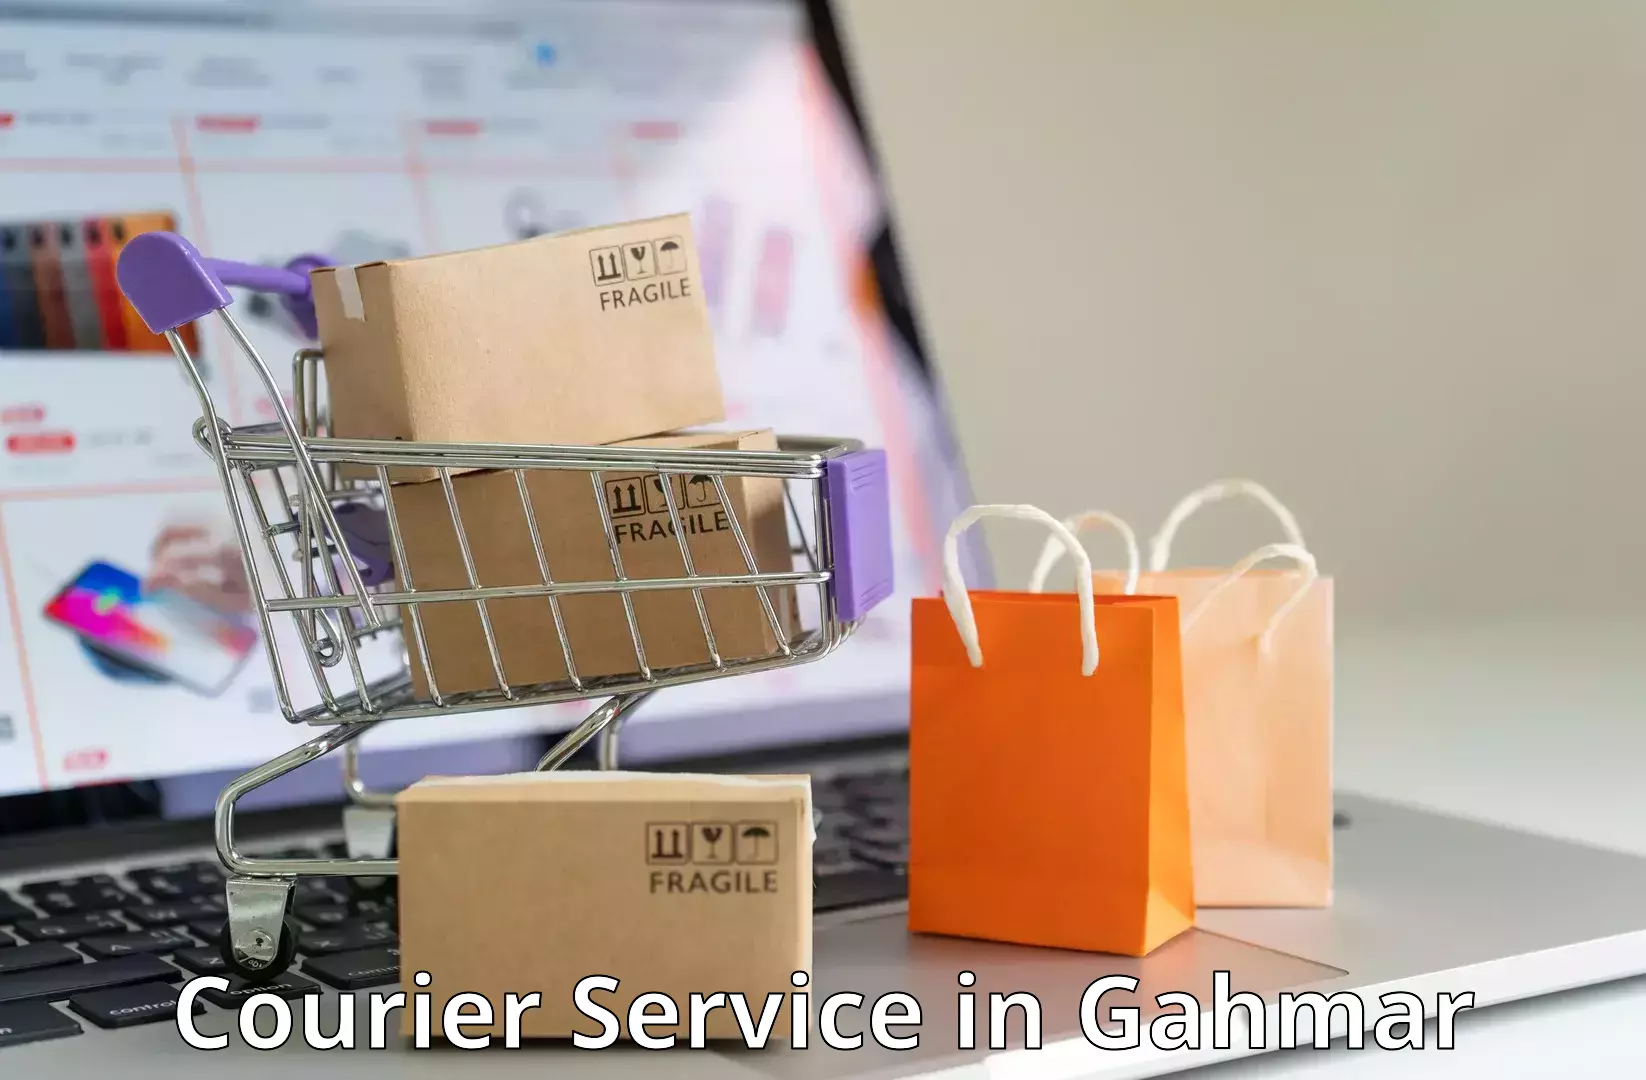 Fast delivery service in Gahmar